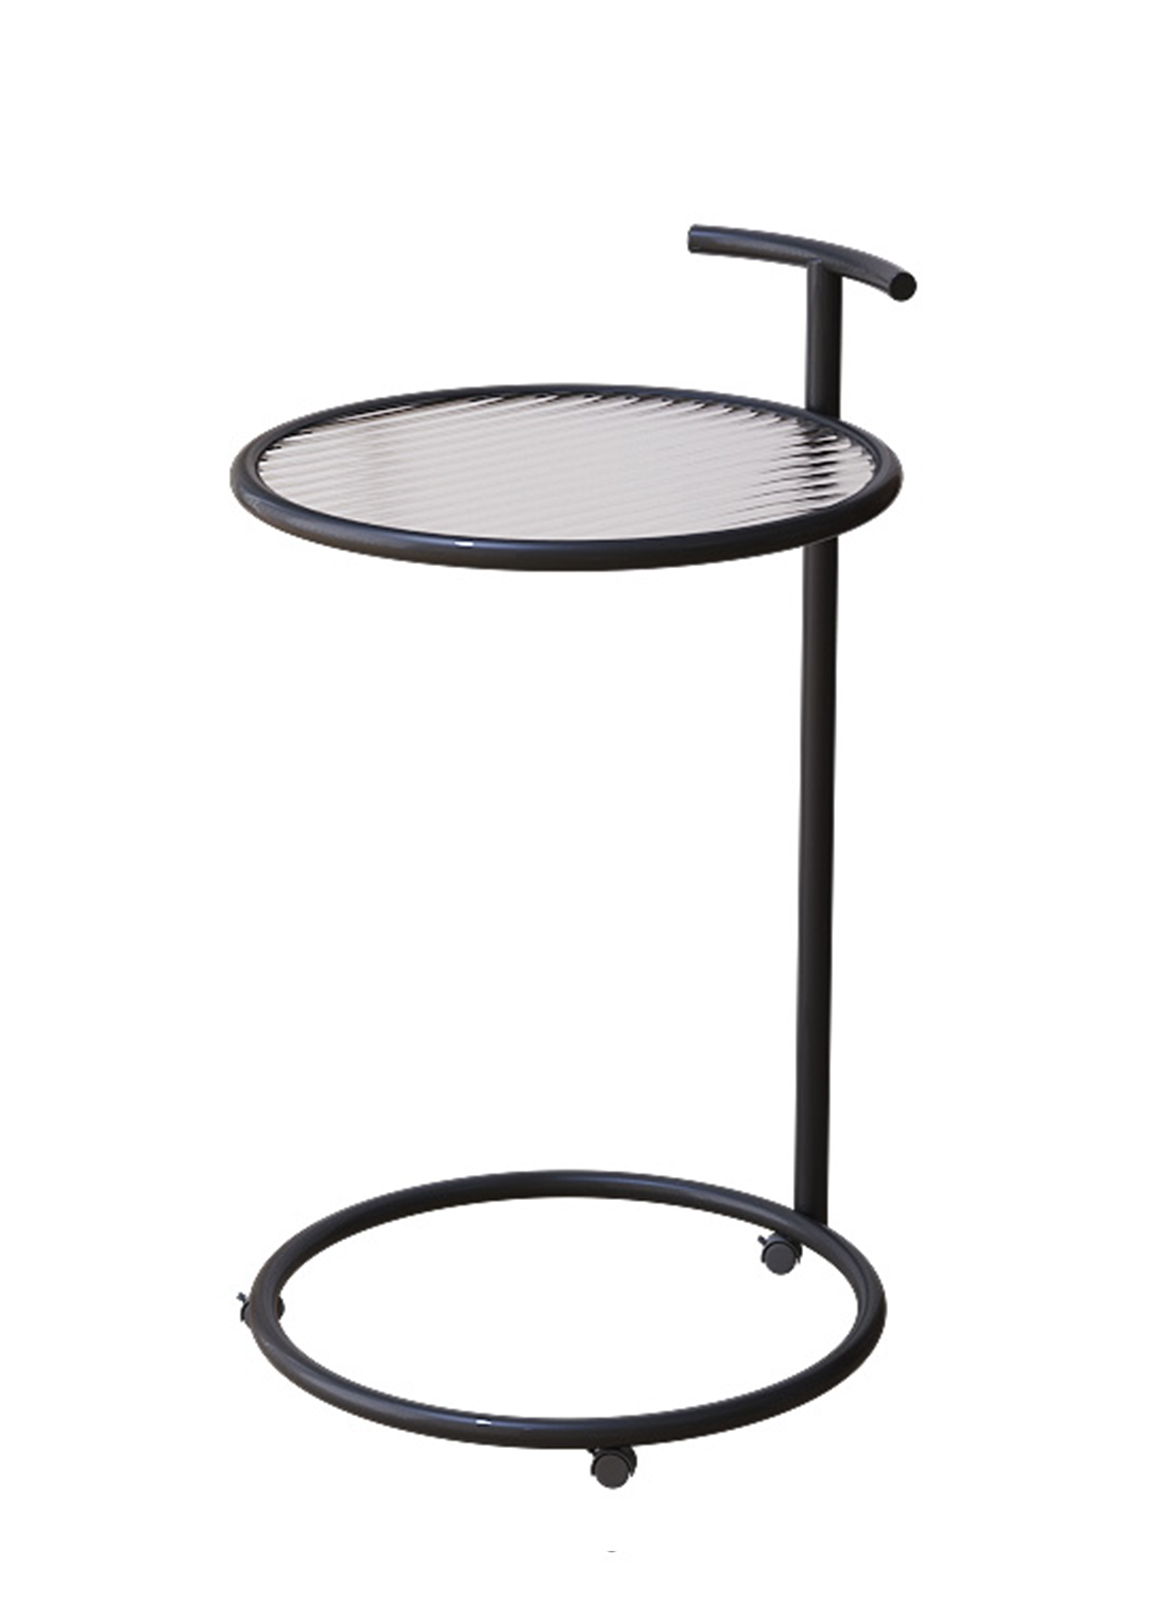 Round Side Table, Transparent Glass End Table with Metal Frame, Modern Coffee Table for Living Room